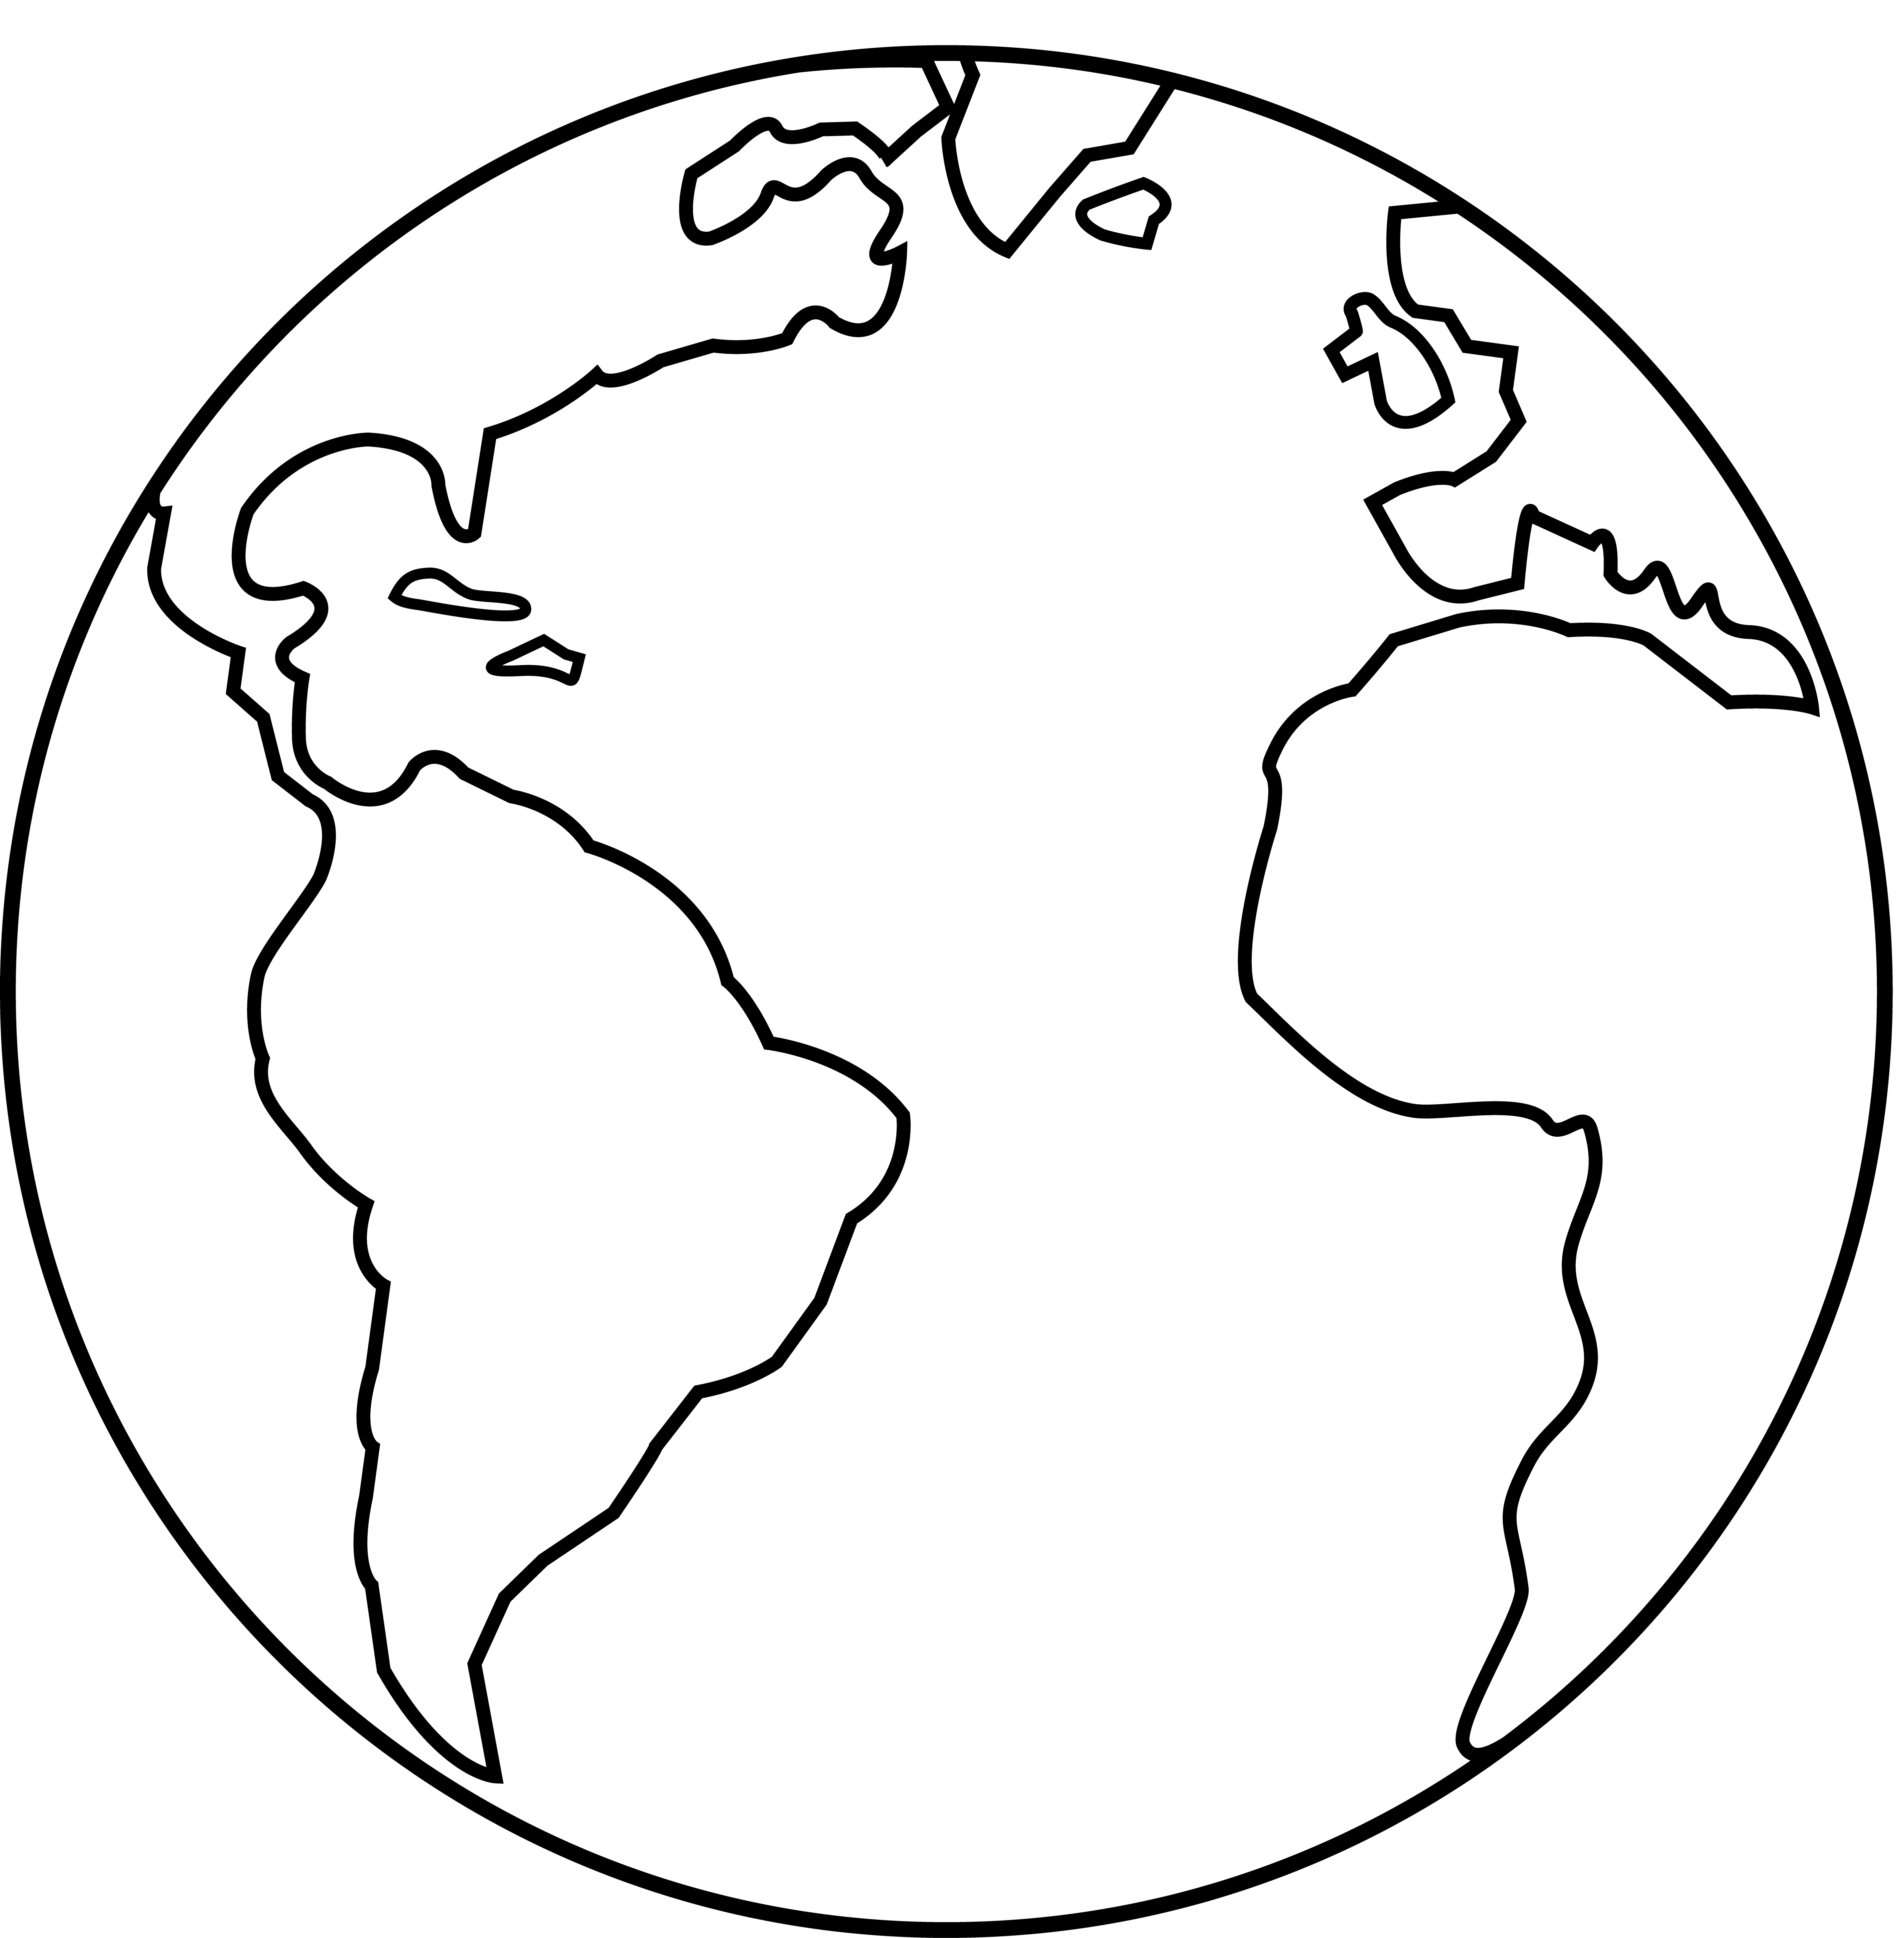 Planet Earth Clipart & Planet Earth Clip Art Images.